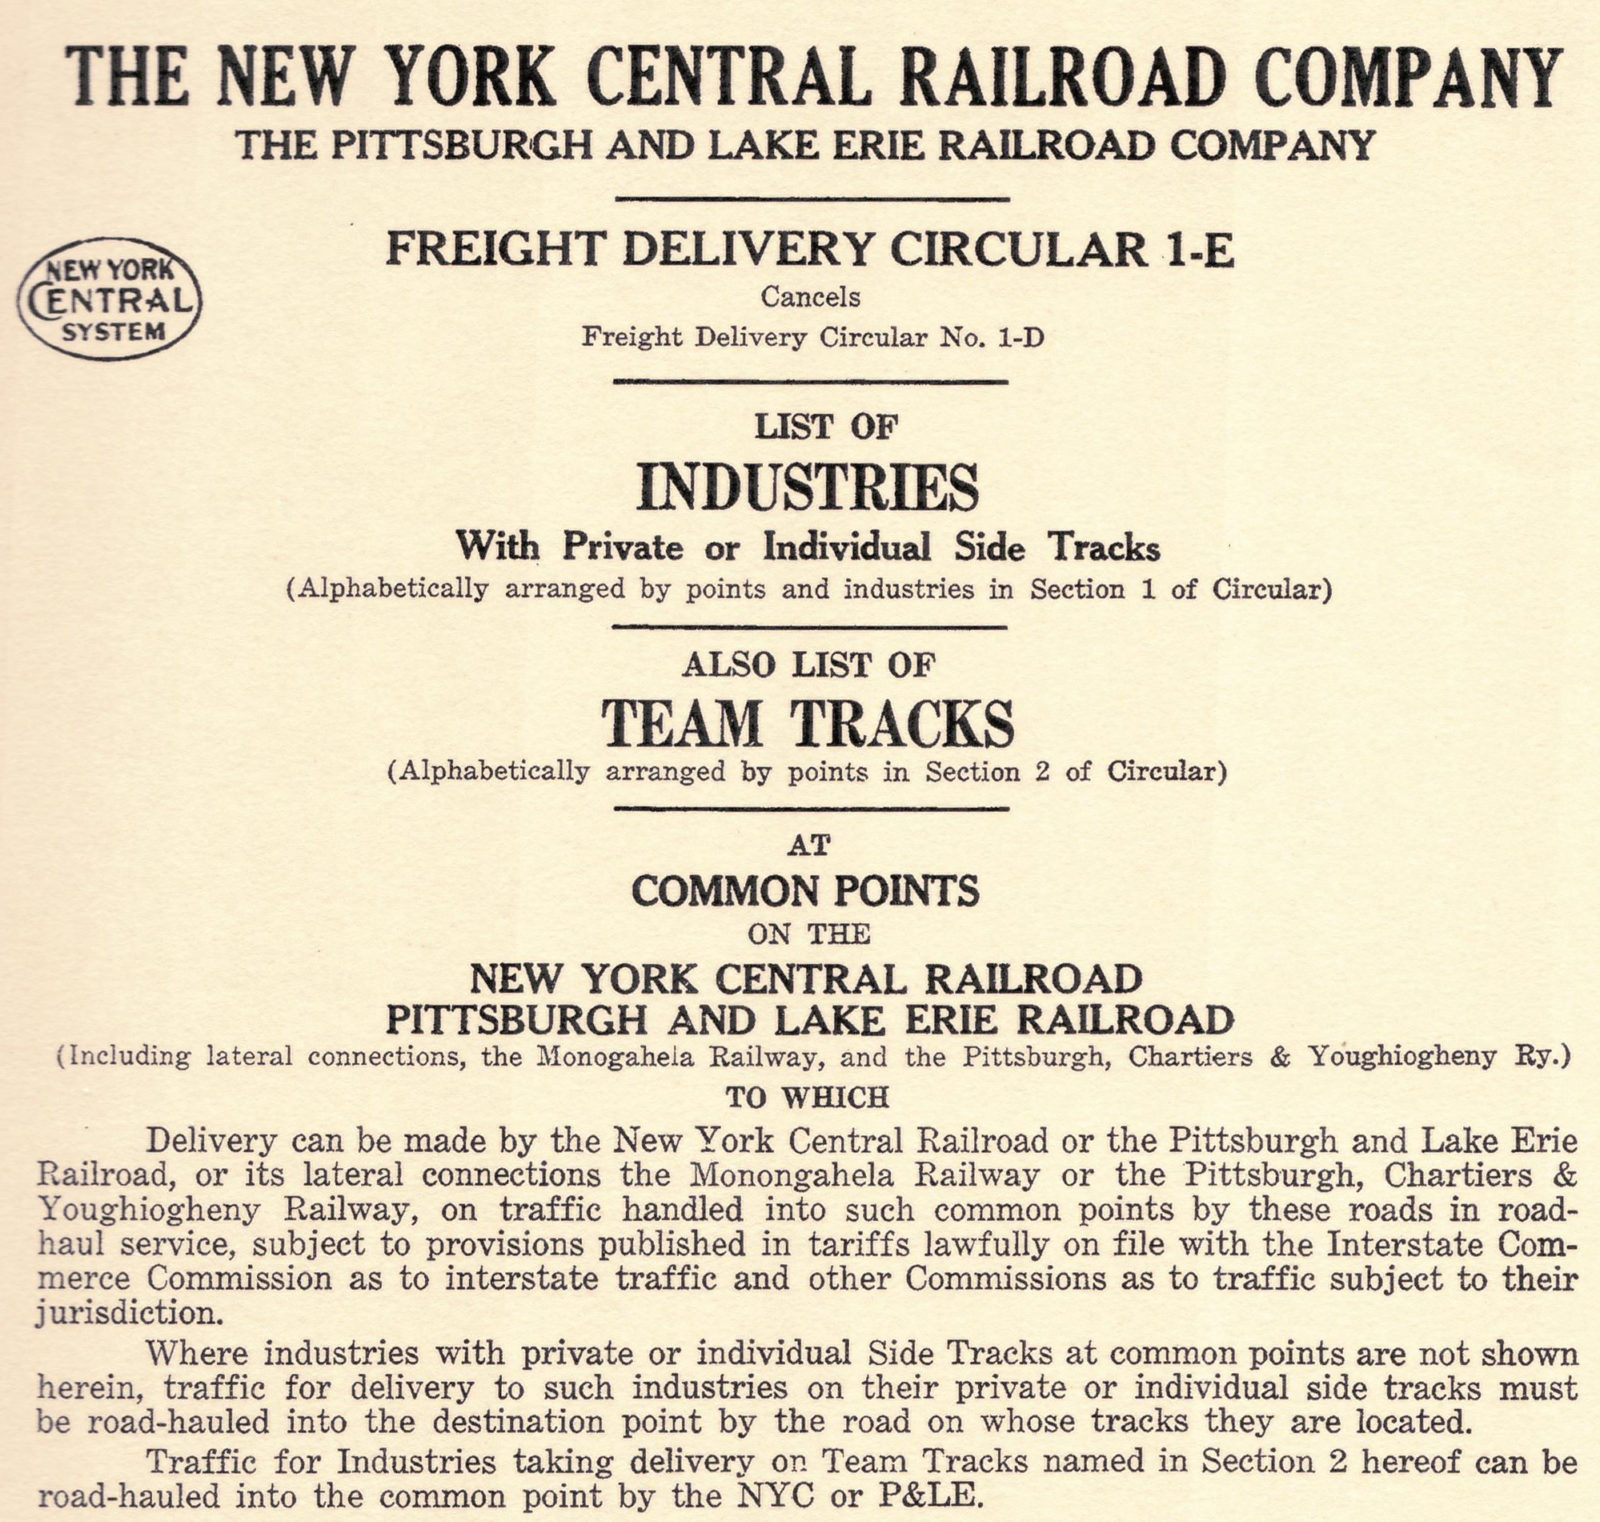 Cover of freight delivery circular.